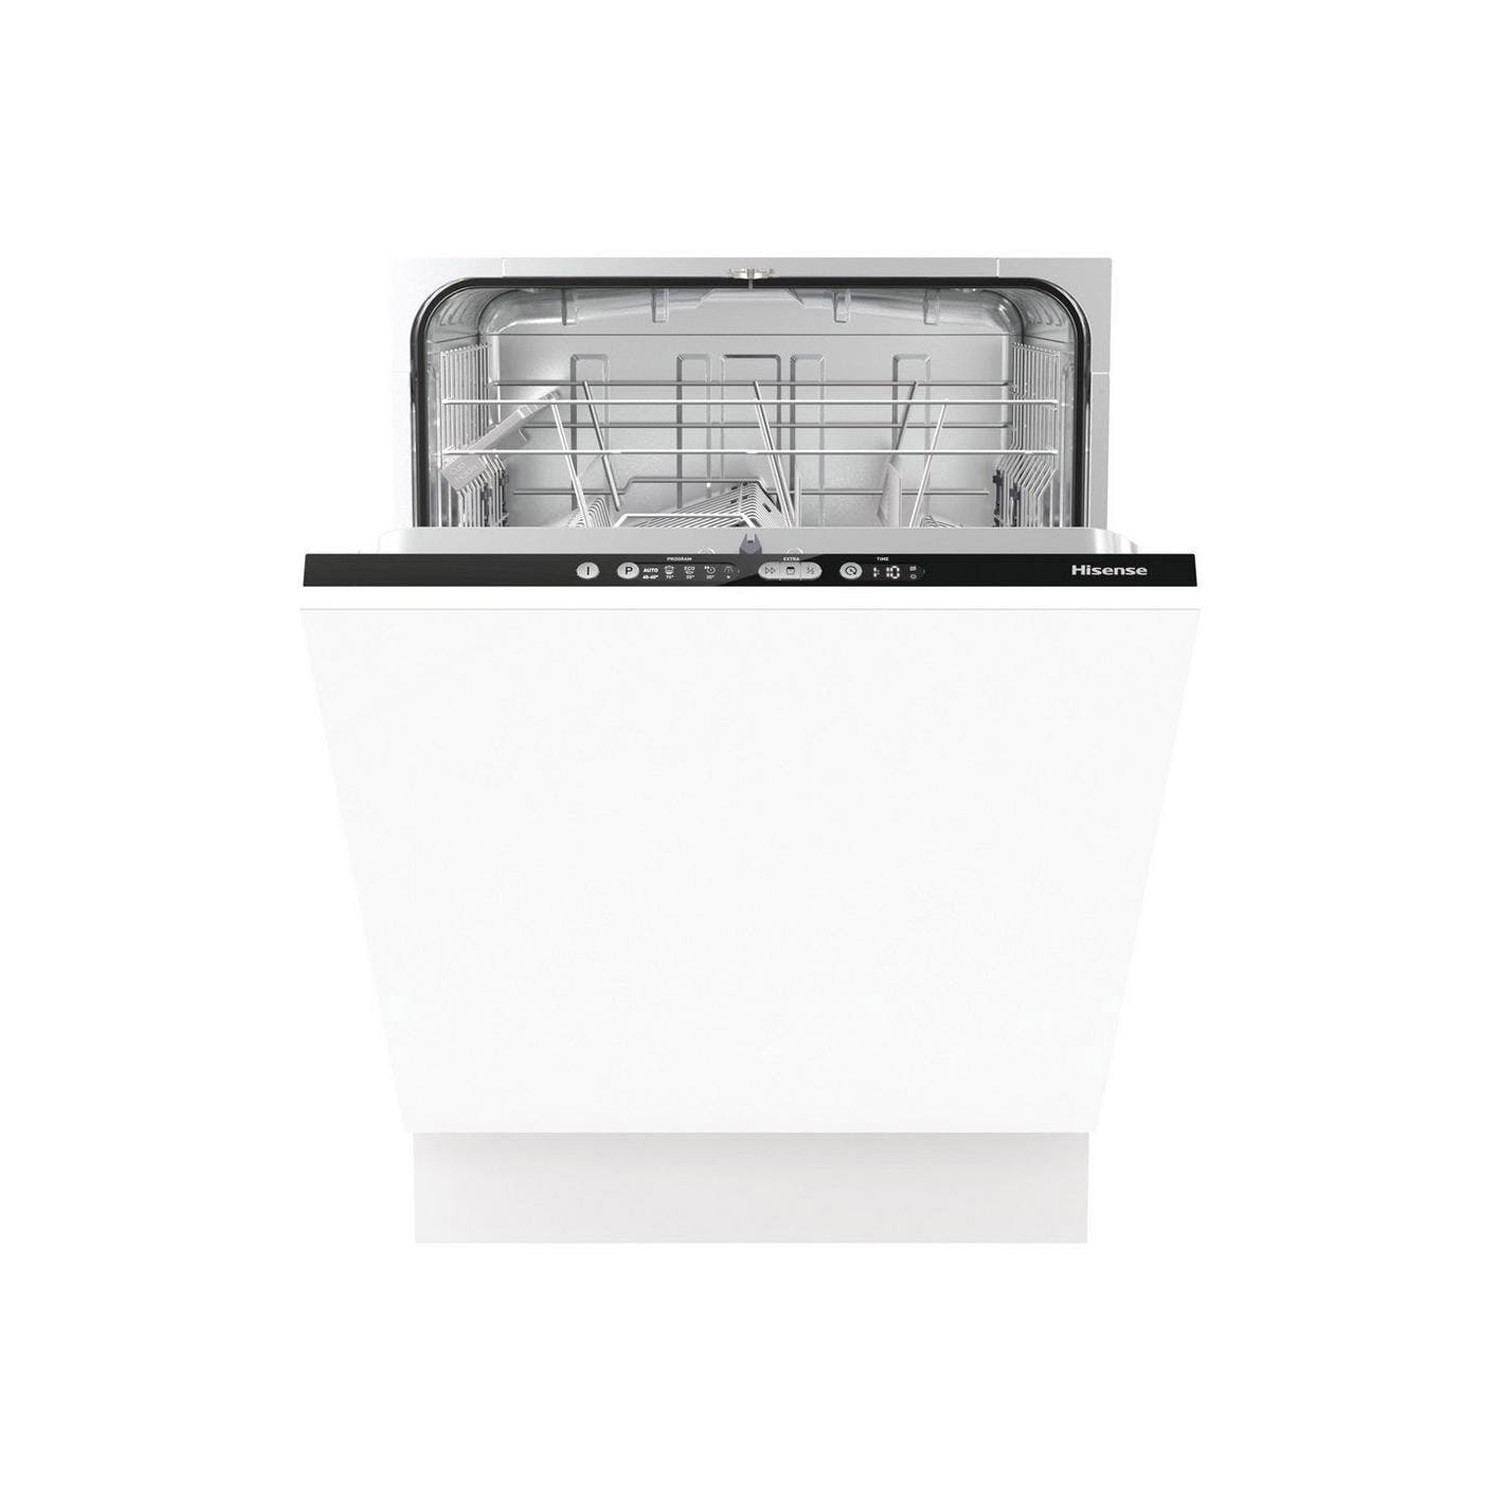 Refurbished Hisense HV651D60UK 13 Place Fully Integrated Dishwasher With AutoDry & 15 Minute Quick W